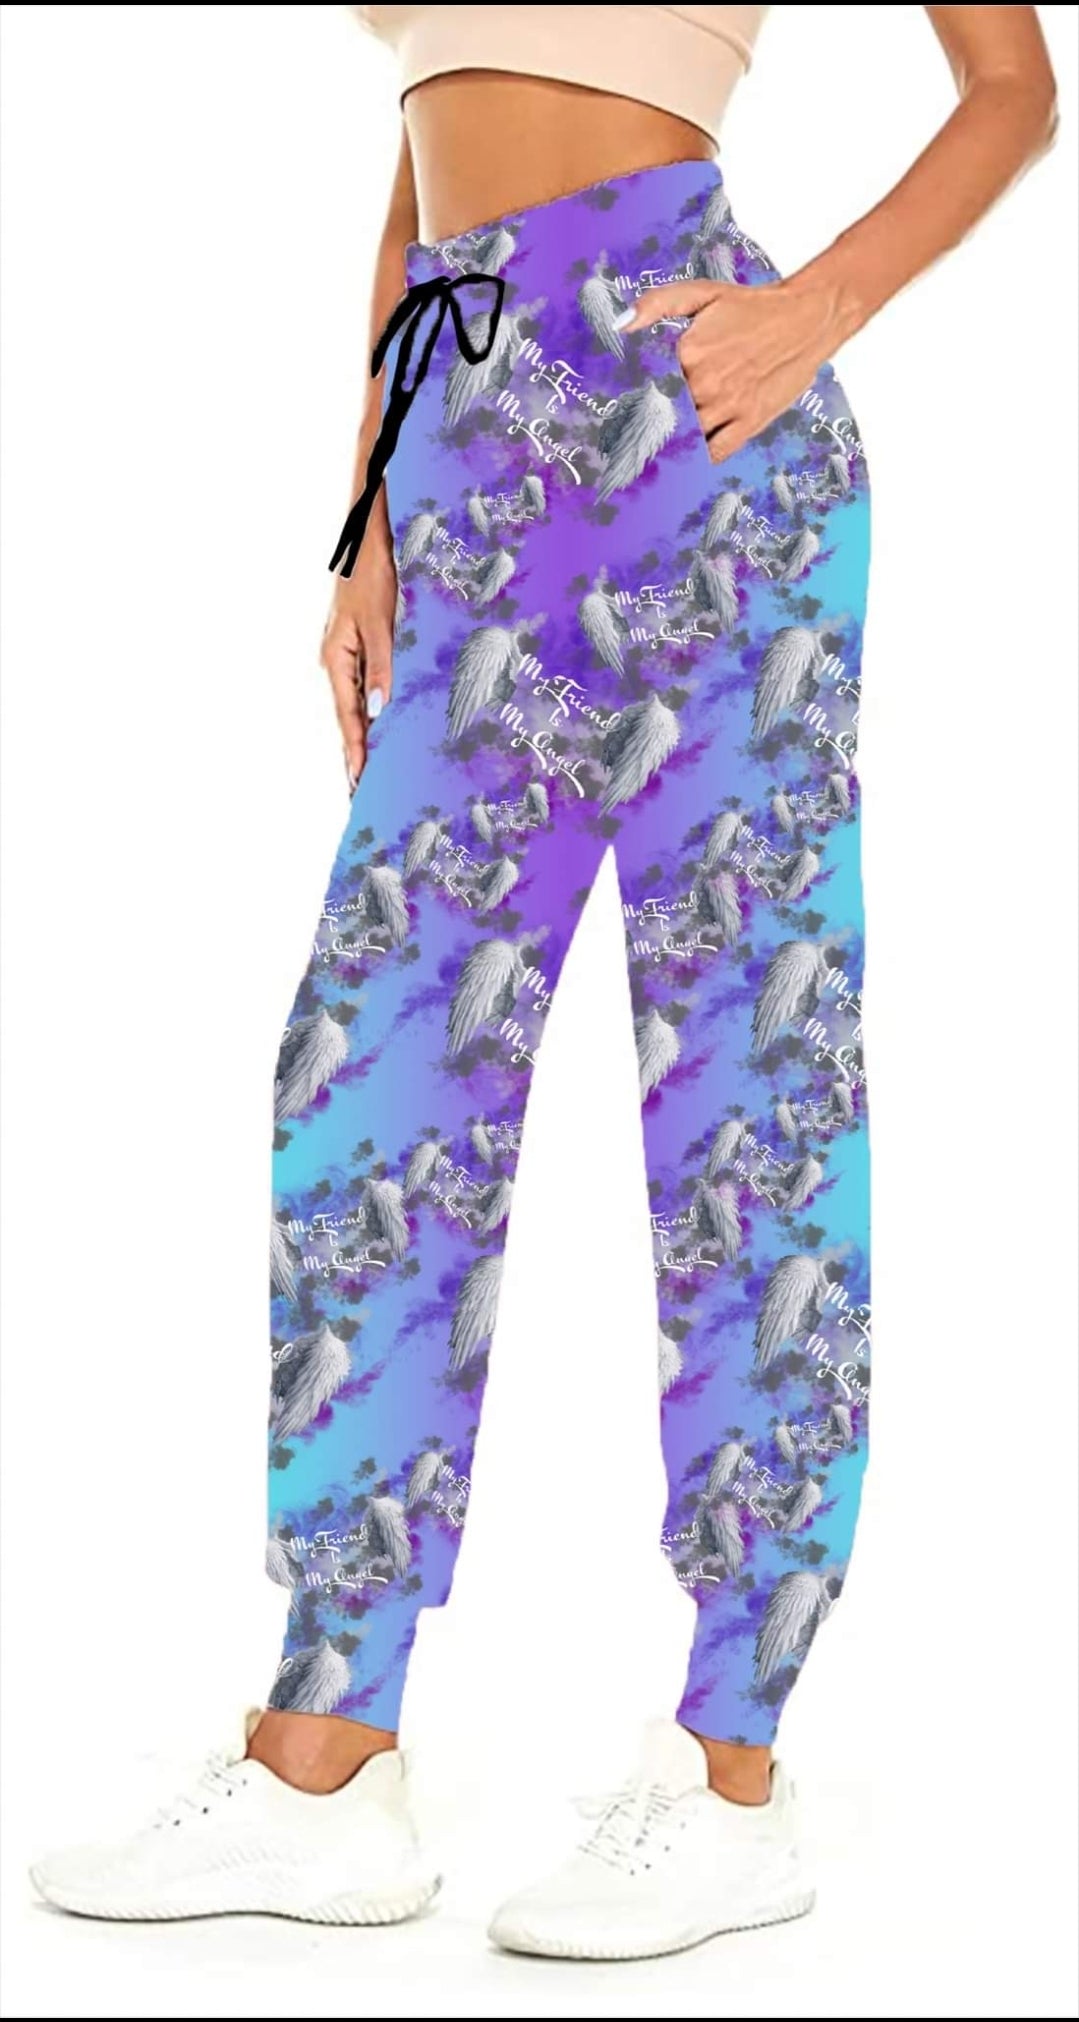 My Friend is my angel leggings with pockets